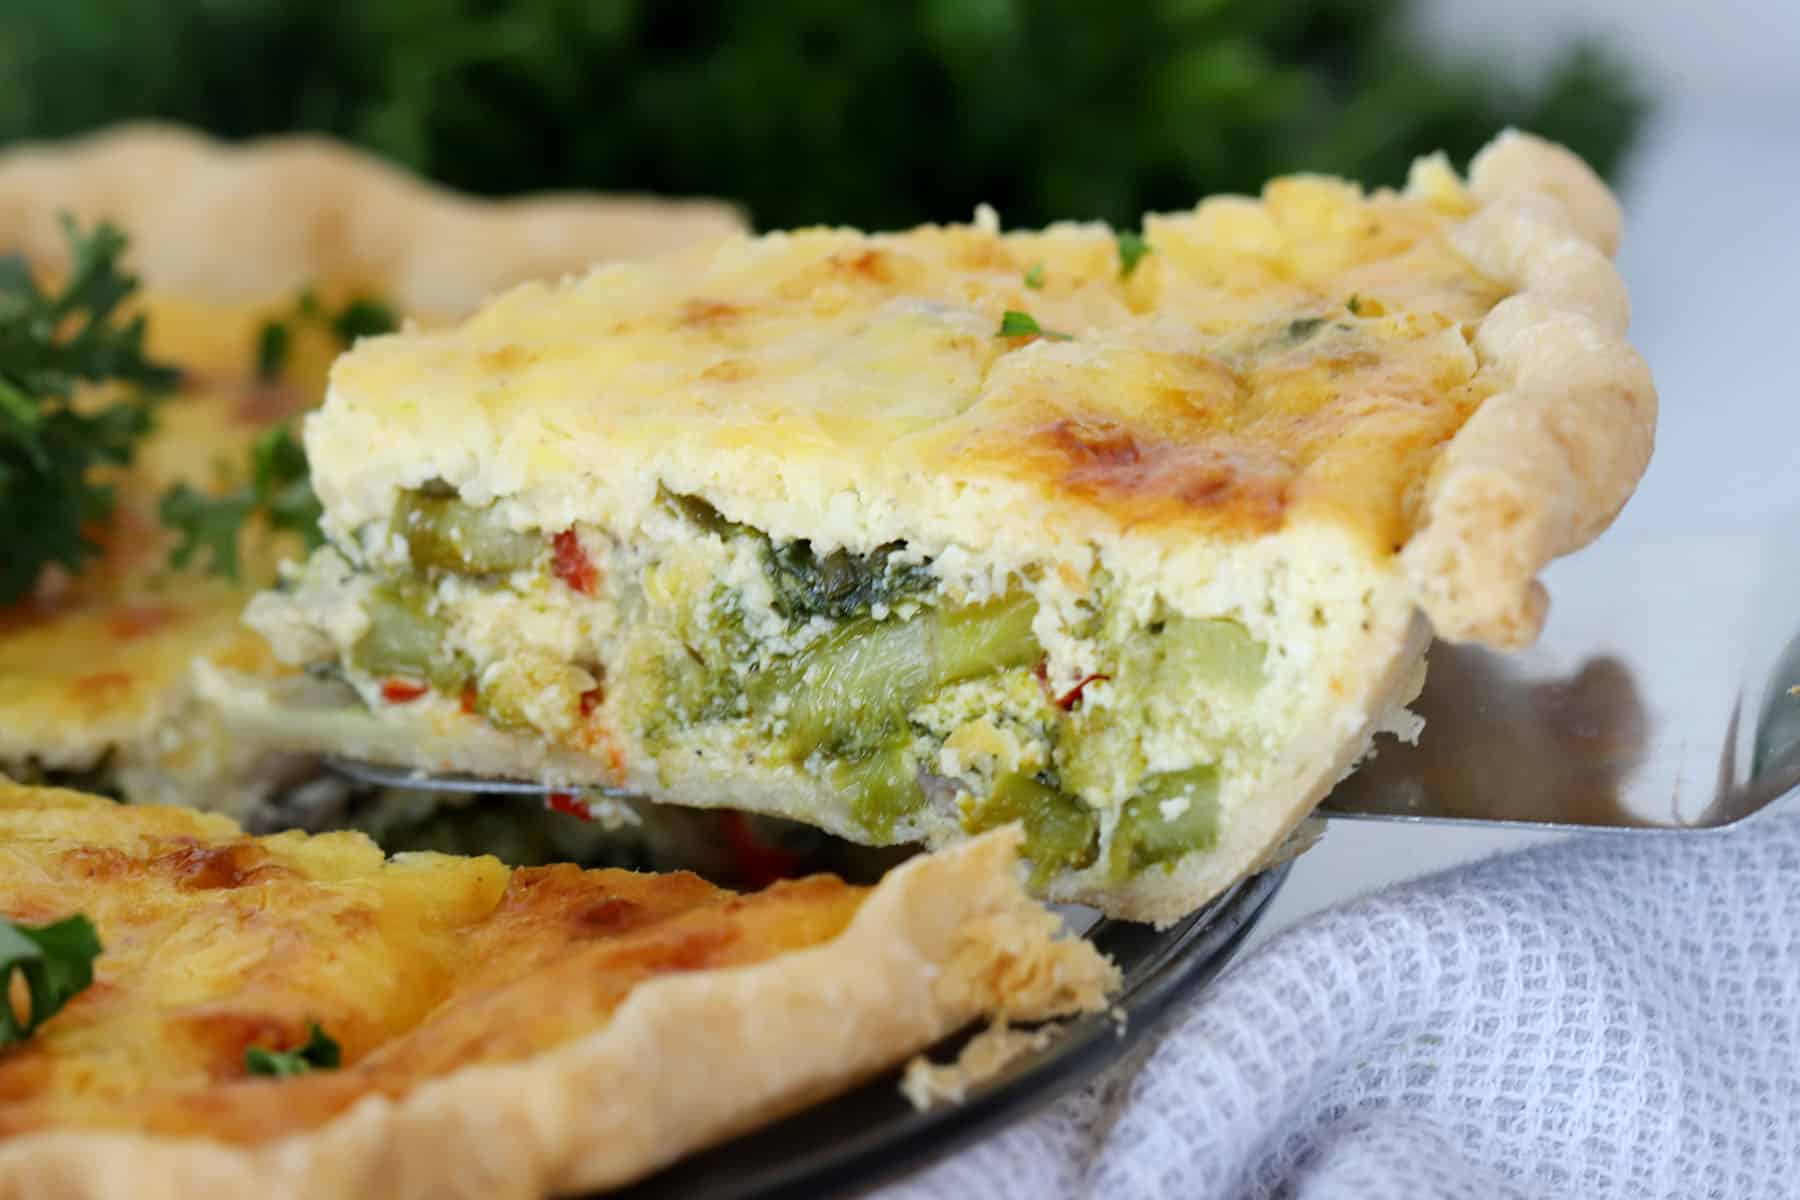 A slice of vegetable quiche being removed from a pie dish.